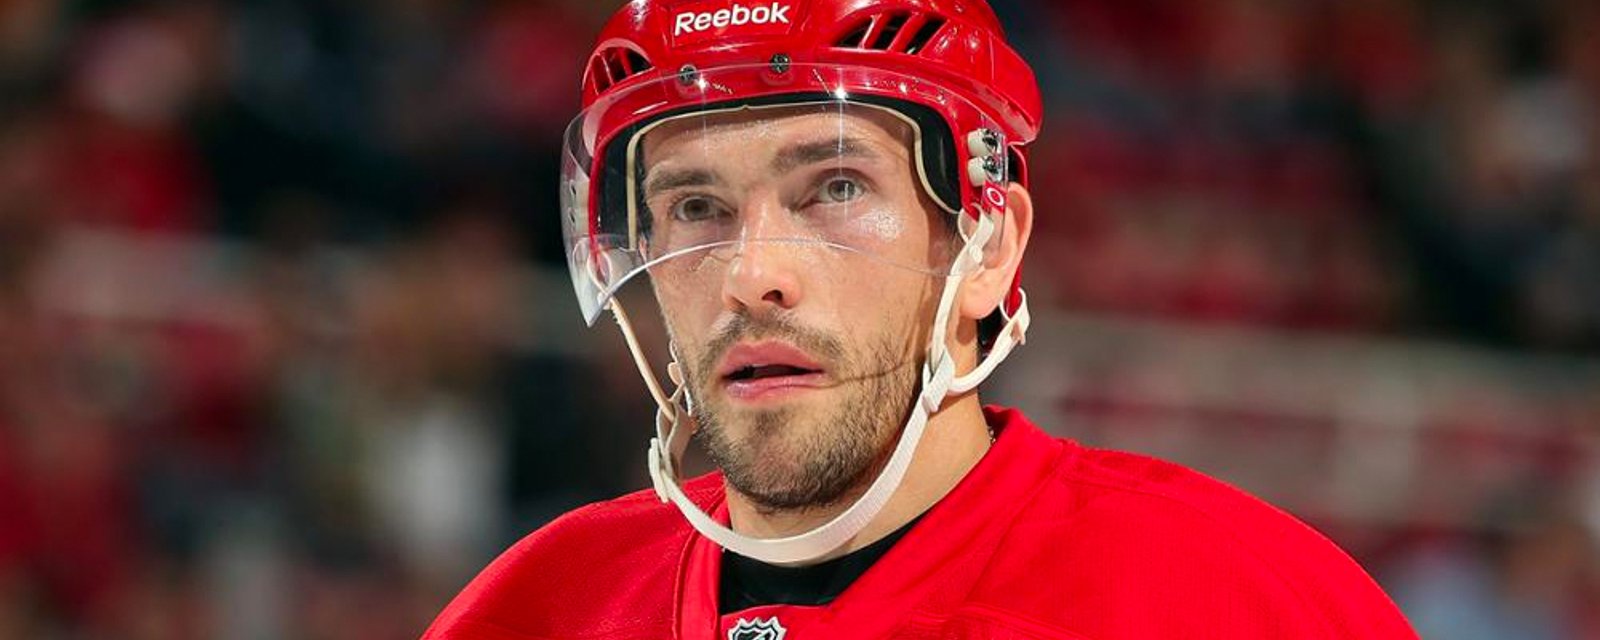 Pavel Datsyuk releases a statement on his future